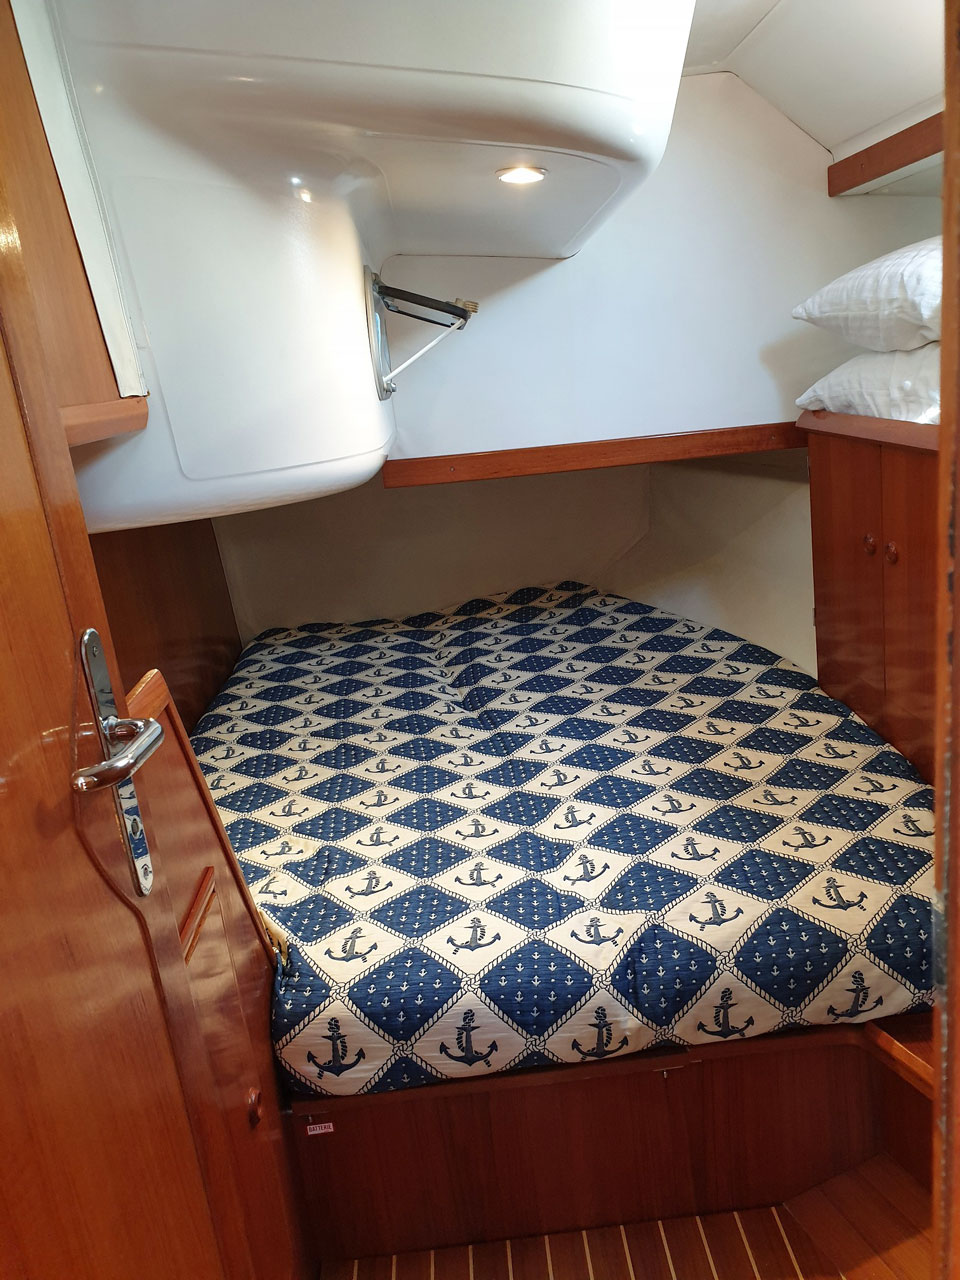 The starboard side aft cabin on a Jeanneau Sun Odyssey 45-1 sailboat